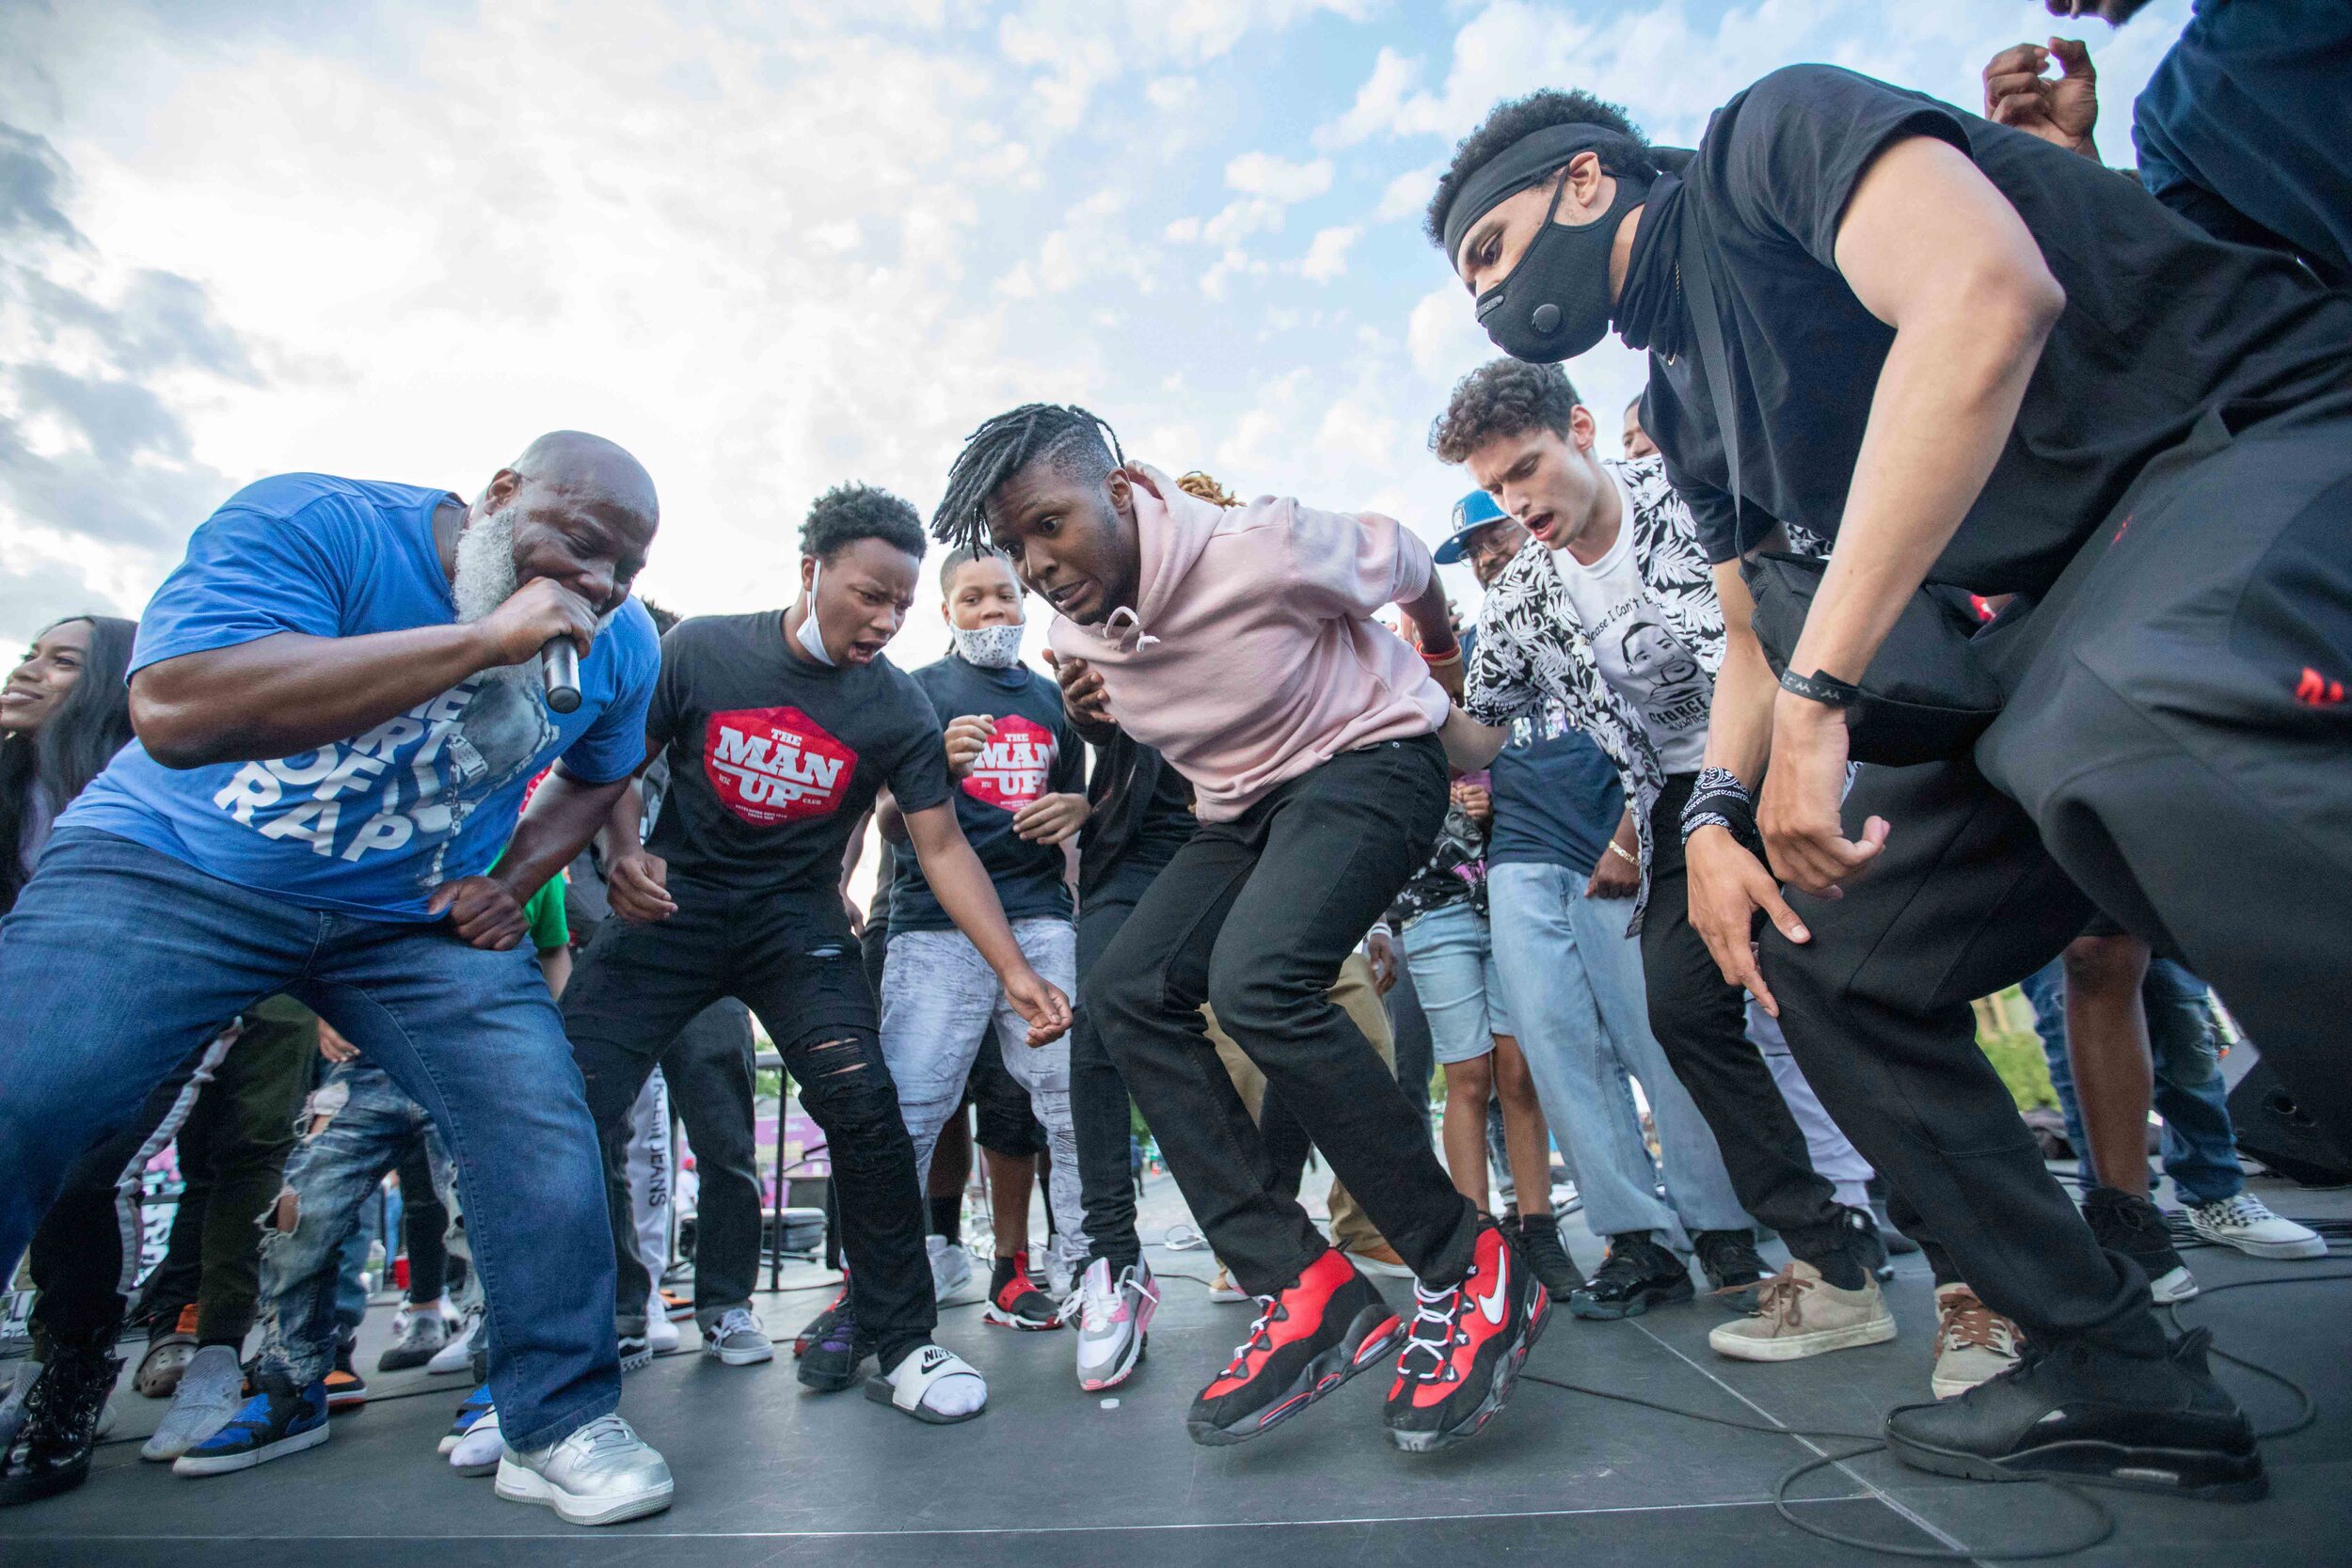  At the George Floyd memorial, young men dance while the hip Christian hop artist Xross performs the song OMG. Xross founded the Man Up Club and lead a prayer at the memorial site in Minneapolis, Minnesota on Jun 14, 2020. 